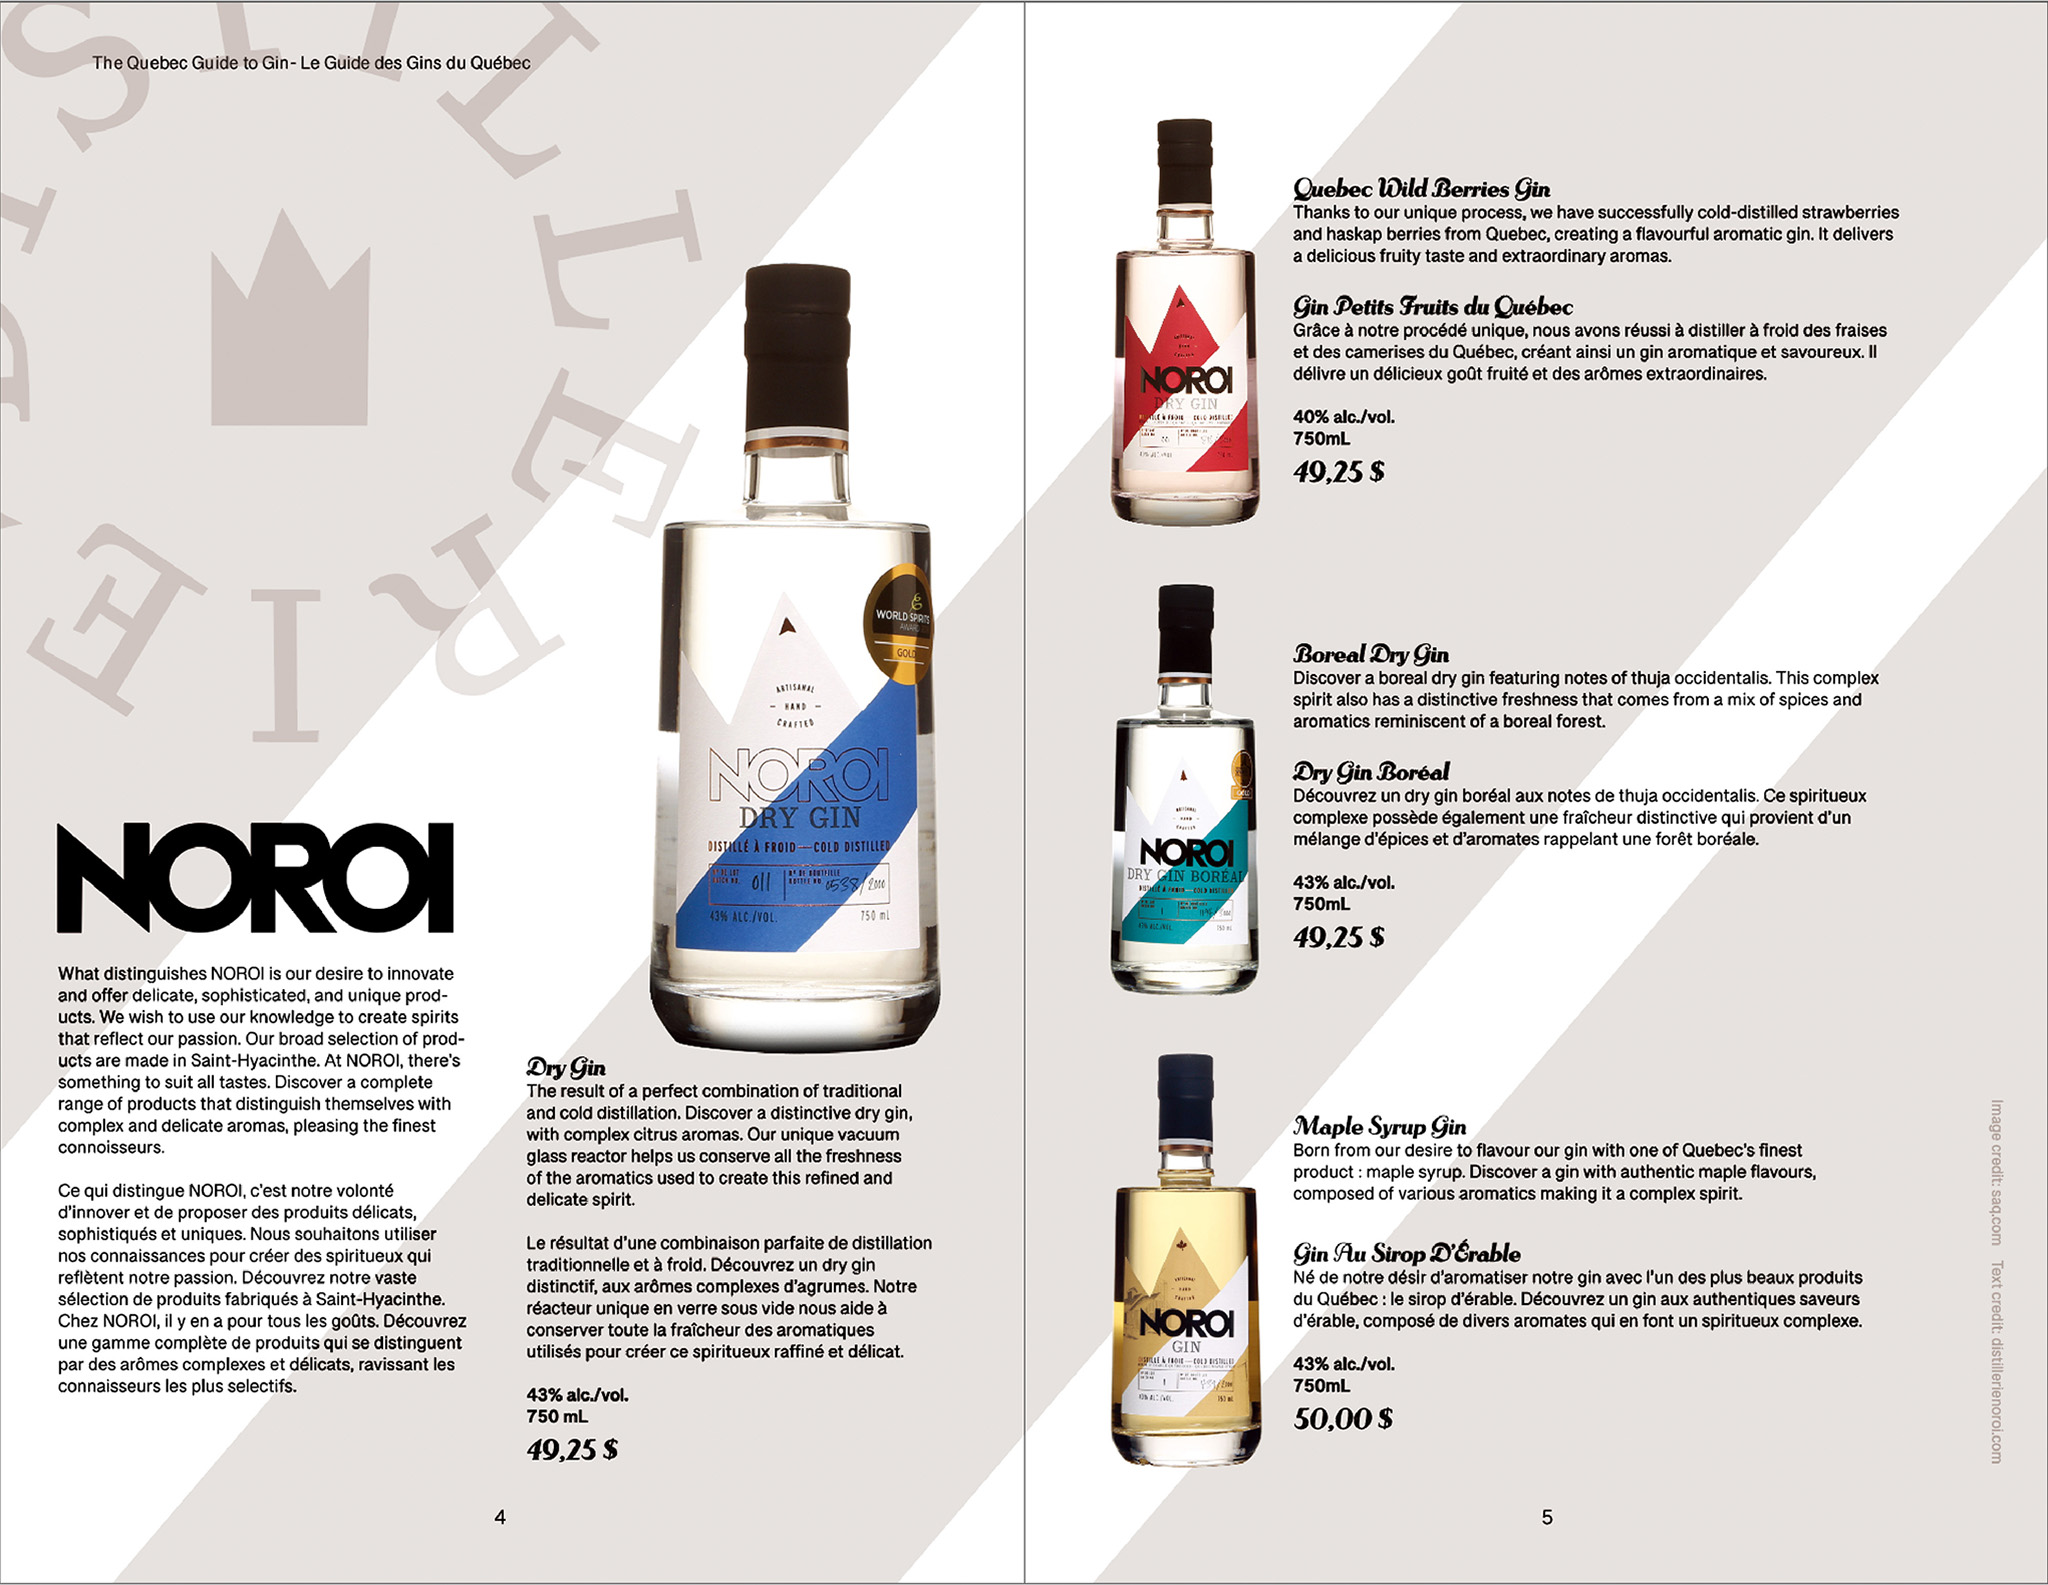 Catalog two page layout presenting Noroi Gin. Left page includes logos and description of company as well as classic gin flavor bottle with detailed description. Right page features 3 bottles of differently flavored gins with descriptions and prices. Background features diagonal lines.